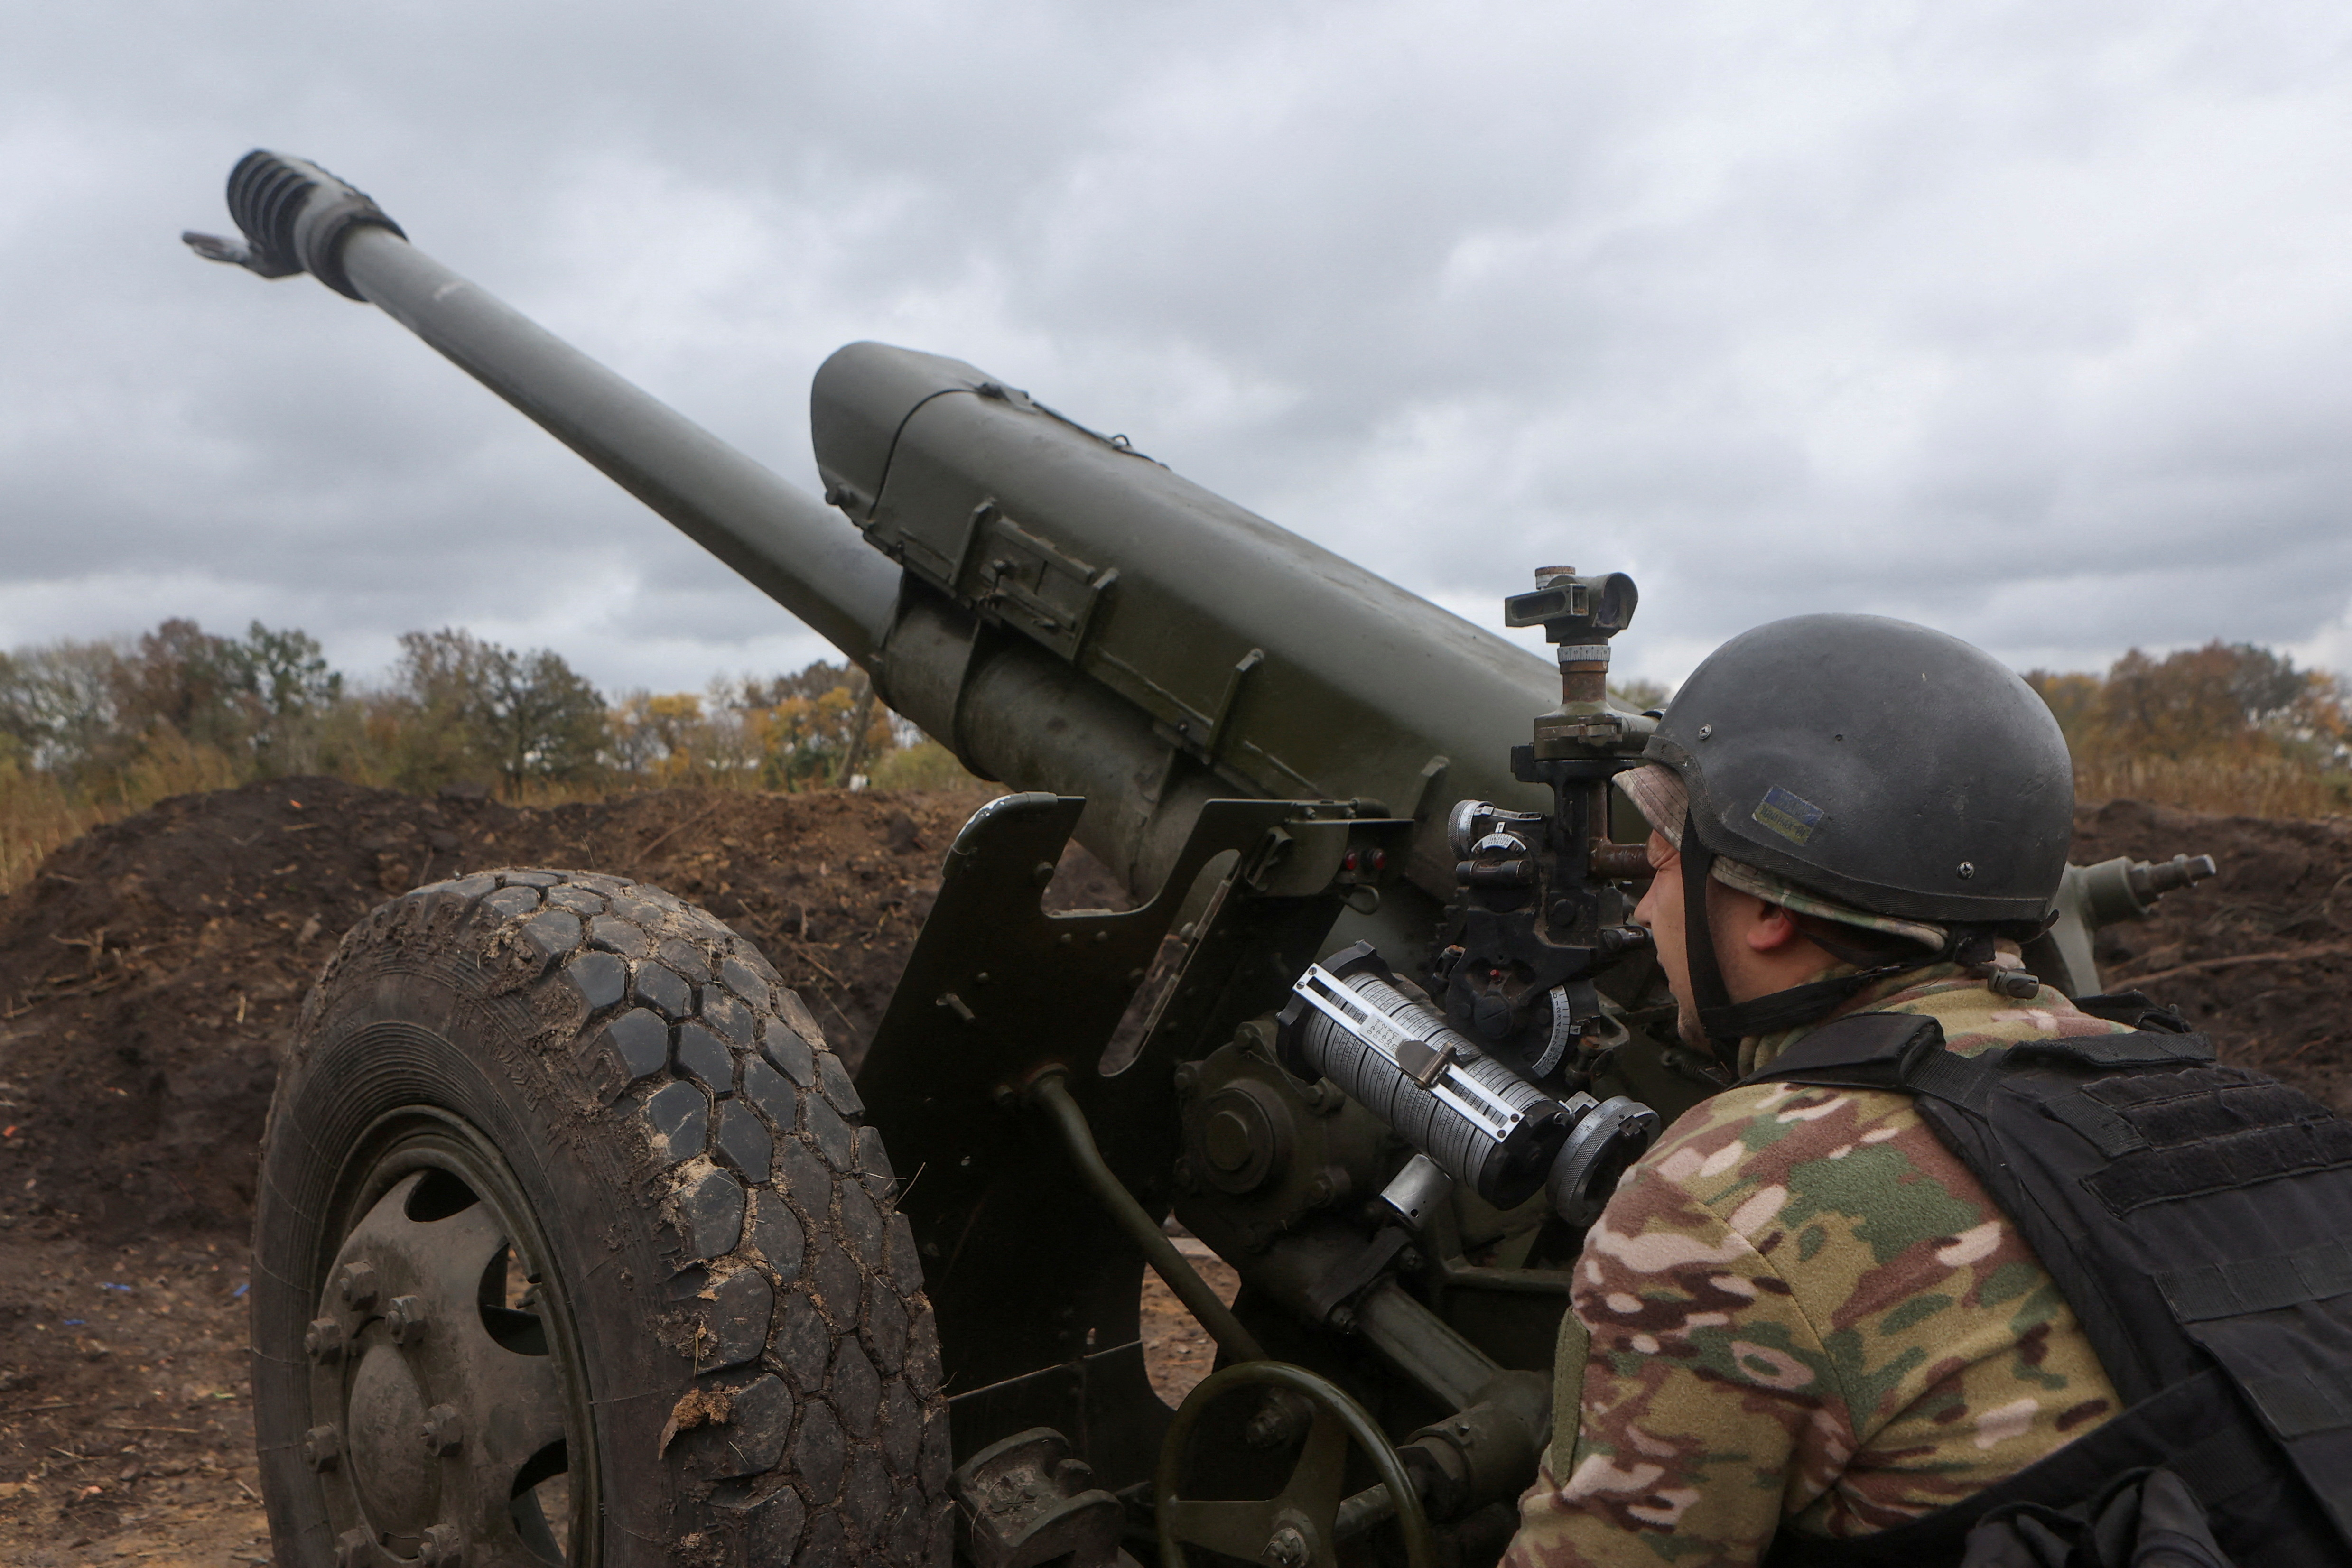 Member of the Ukrainian National Guard prepares a D-30 howitzer for a fire towards Russian troops in Kharkiv region